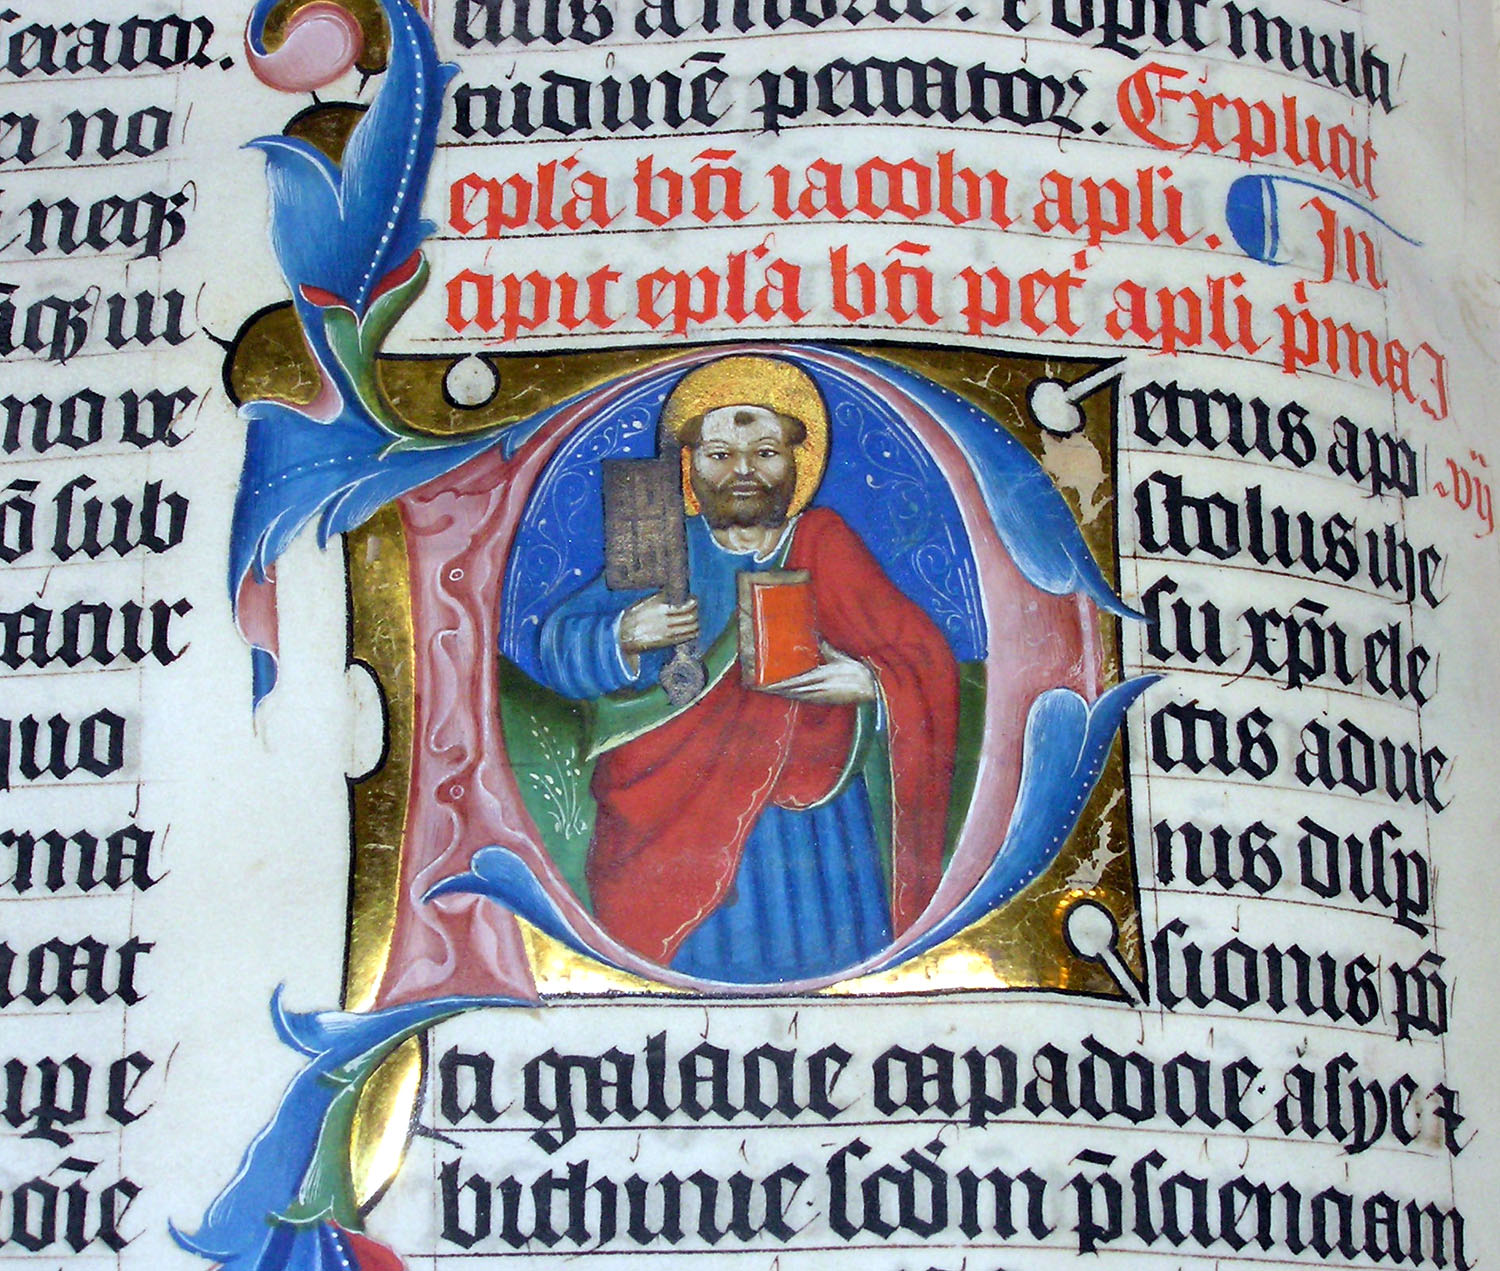 An example of an illuminated manuscript. This example is a close up of the illuminated letter P in the 1407AD Latin Bible on display in Malmesbury Abbey, Wiltshire, England. It was hand written in Belgium, by Gerard Brils.